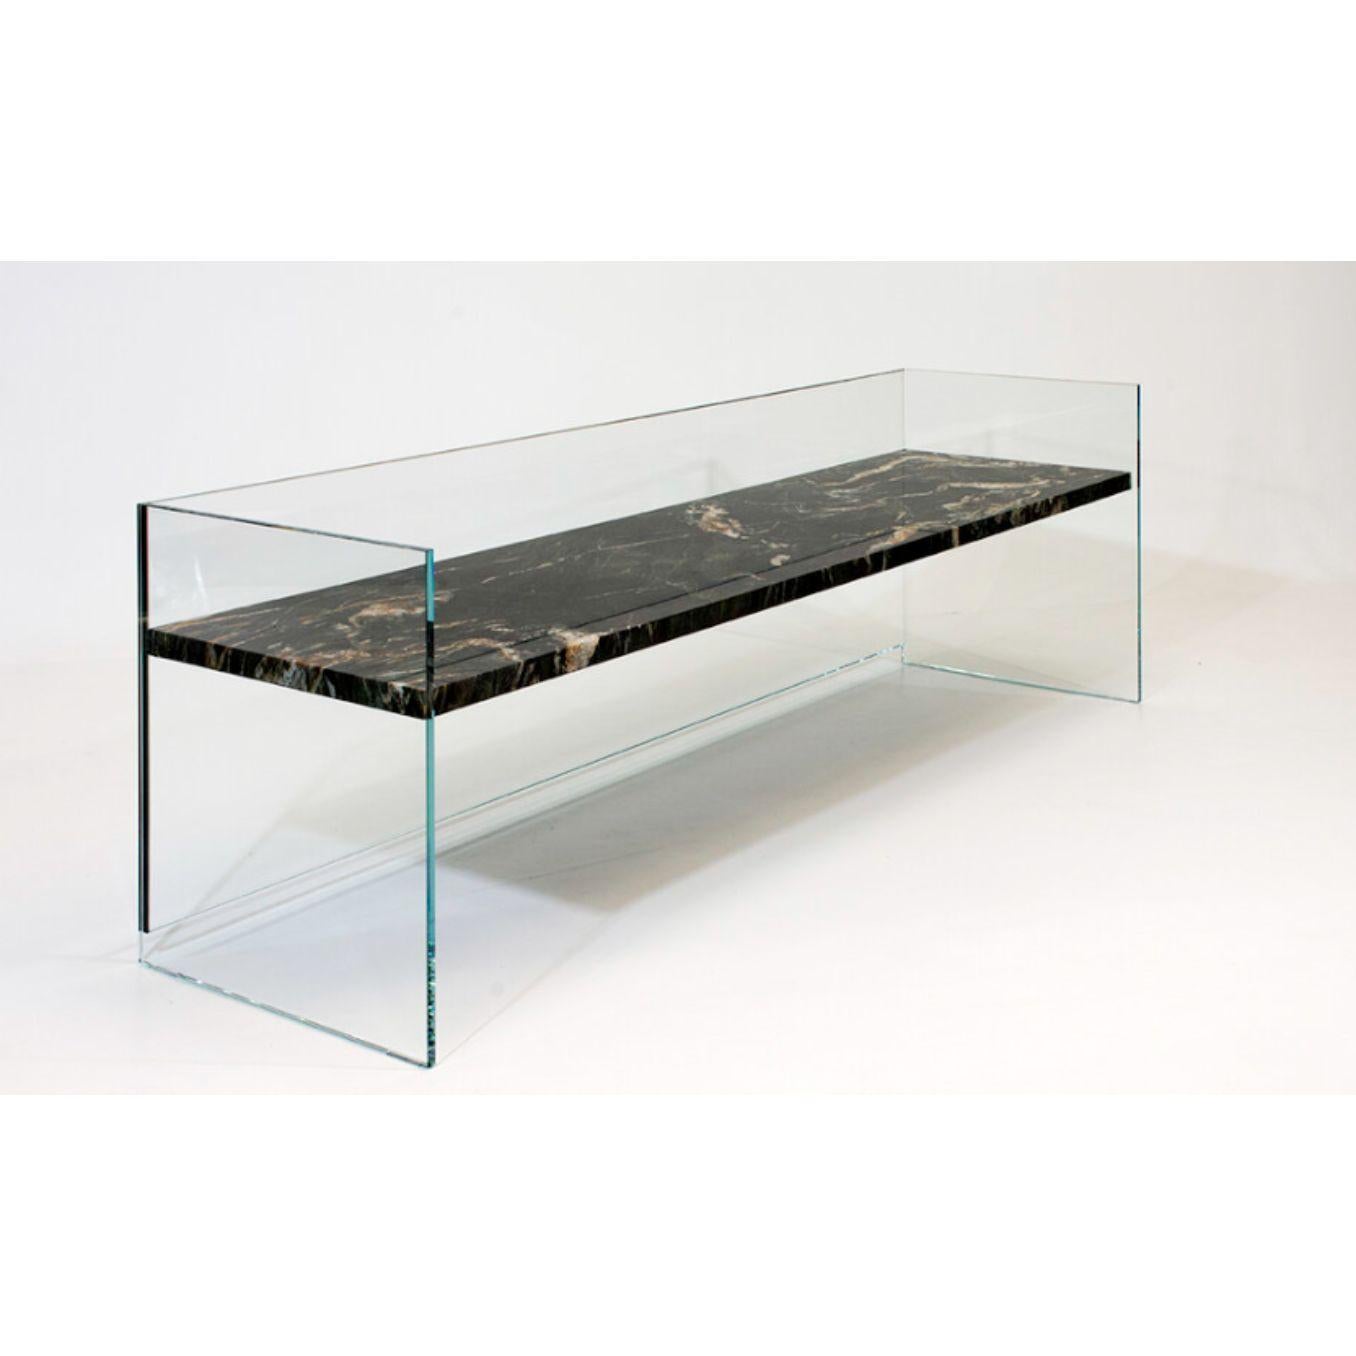 So We Meet Again Long Bench by Claste 
Dimensions: D 50.8 x W 122 x H 55.9 cm
Material: Glass, Marble
Weight: 93 kg
Also available in different sizes and materials: Carrara Gioia, Belvedere Black, Mont Blanc, Manhatten Calacatta, Fusion Marble,